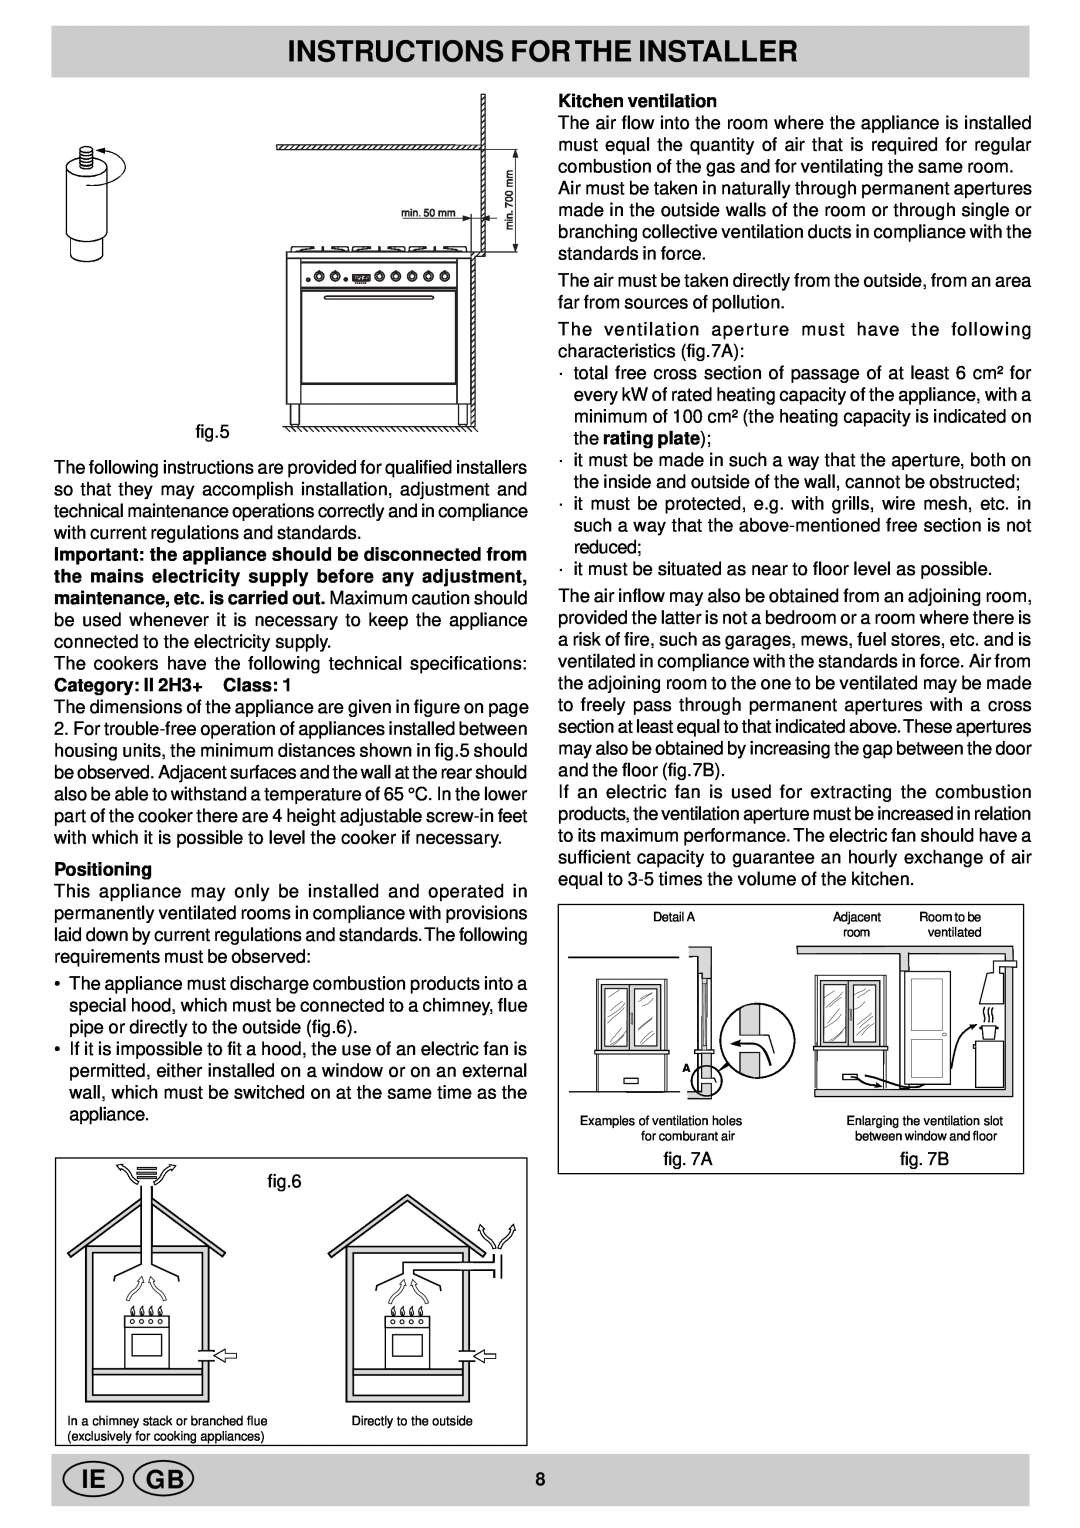 Indesit KP 59 MS.C (X)/G Instructions For The Installer, Category II 2H3+ Class, Positioning, Kitchen ventilation, Ie Gb 